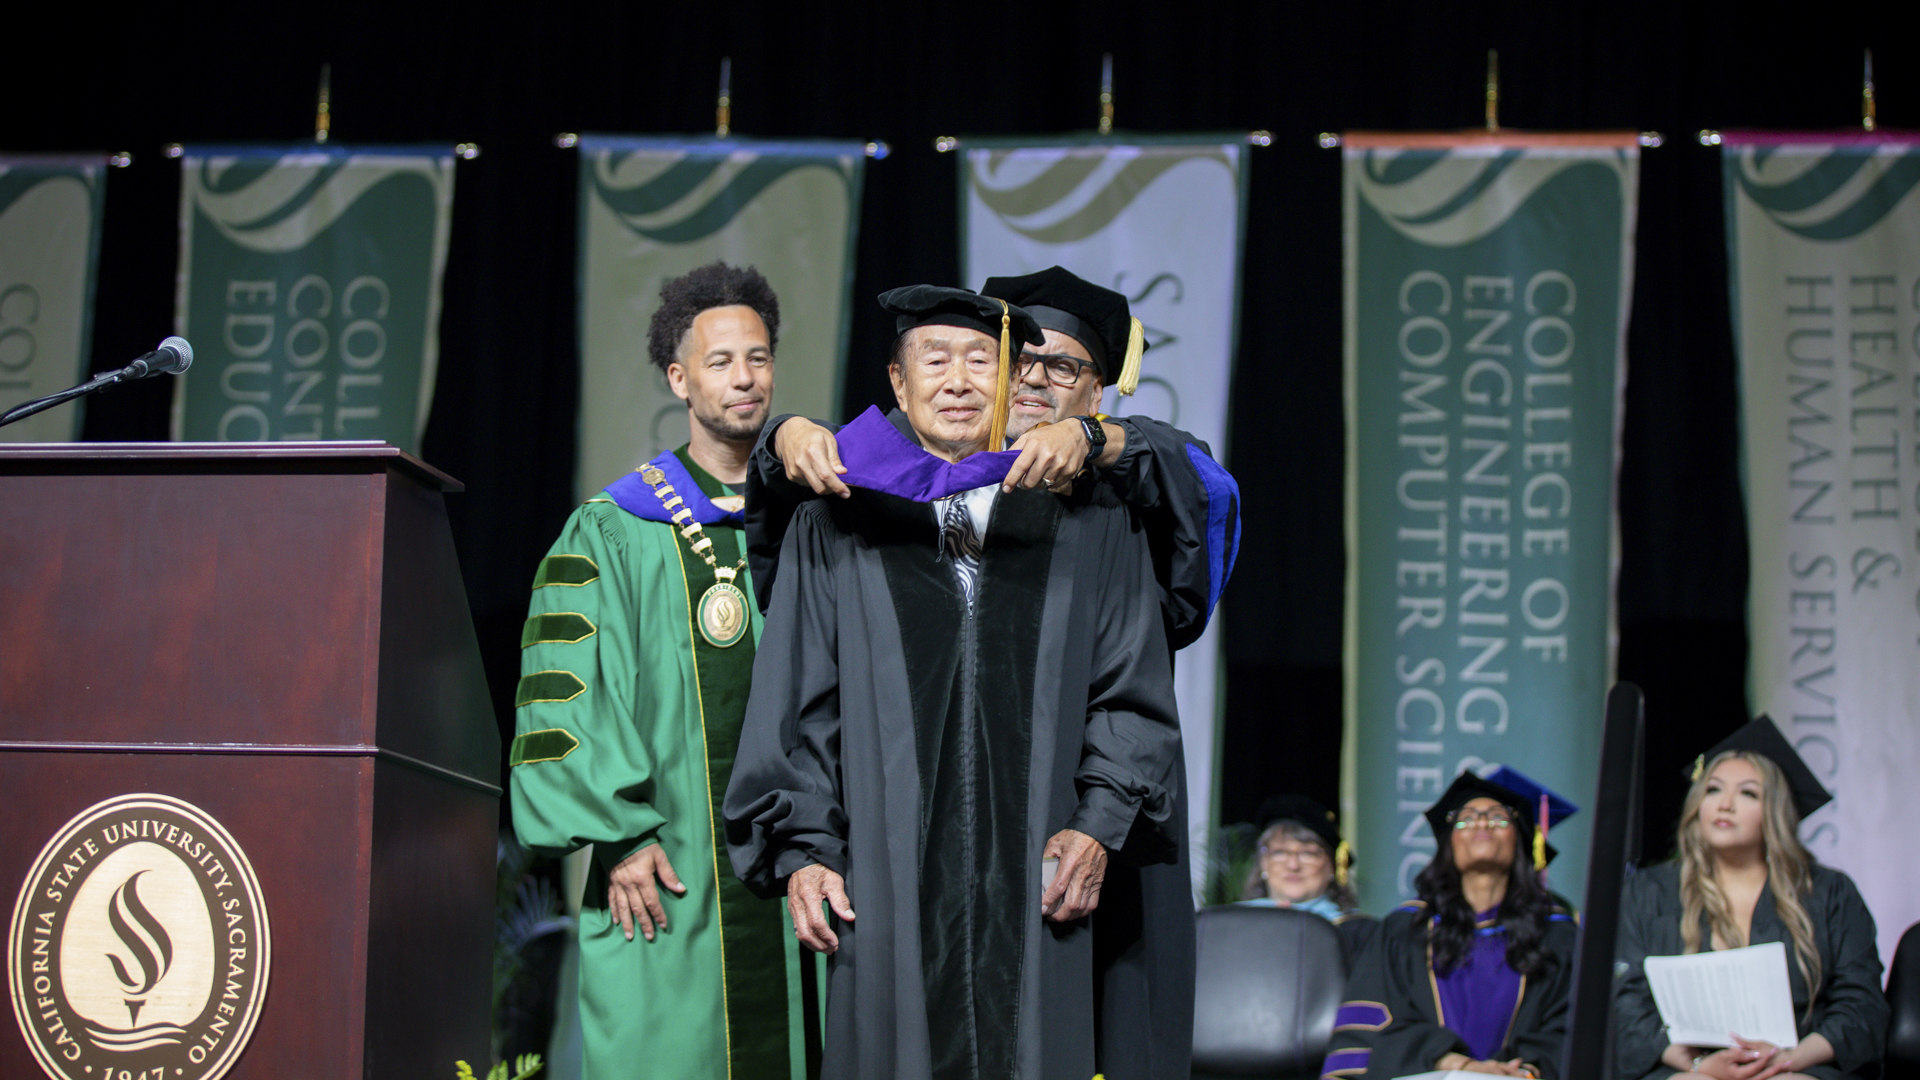 President Wood and Carlos Nevarez honor Roger Fong at Commencement.